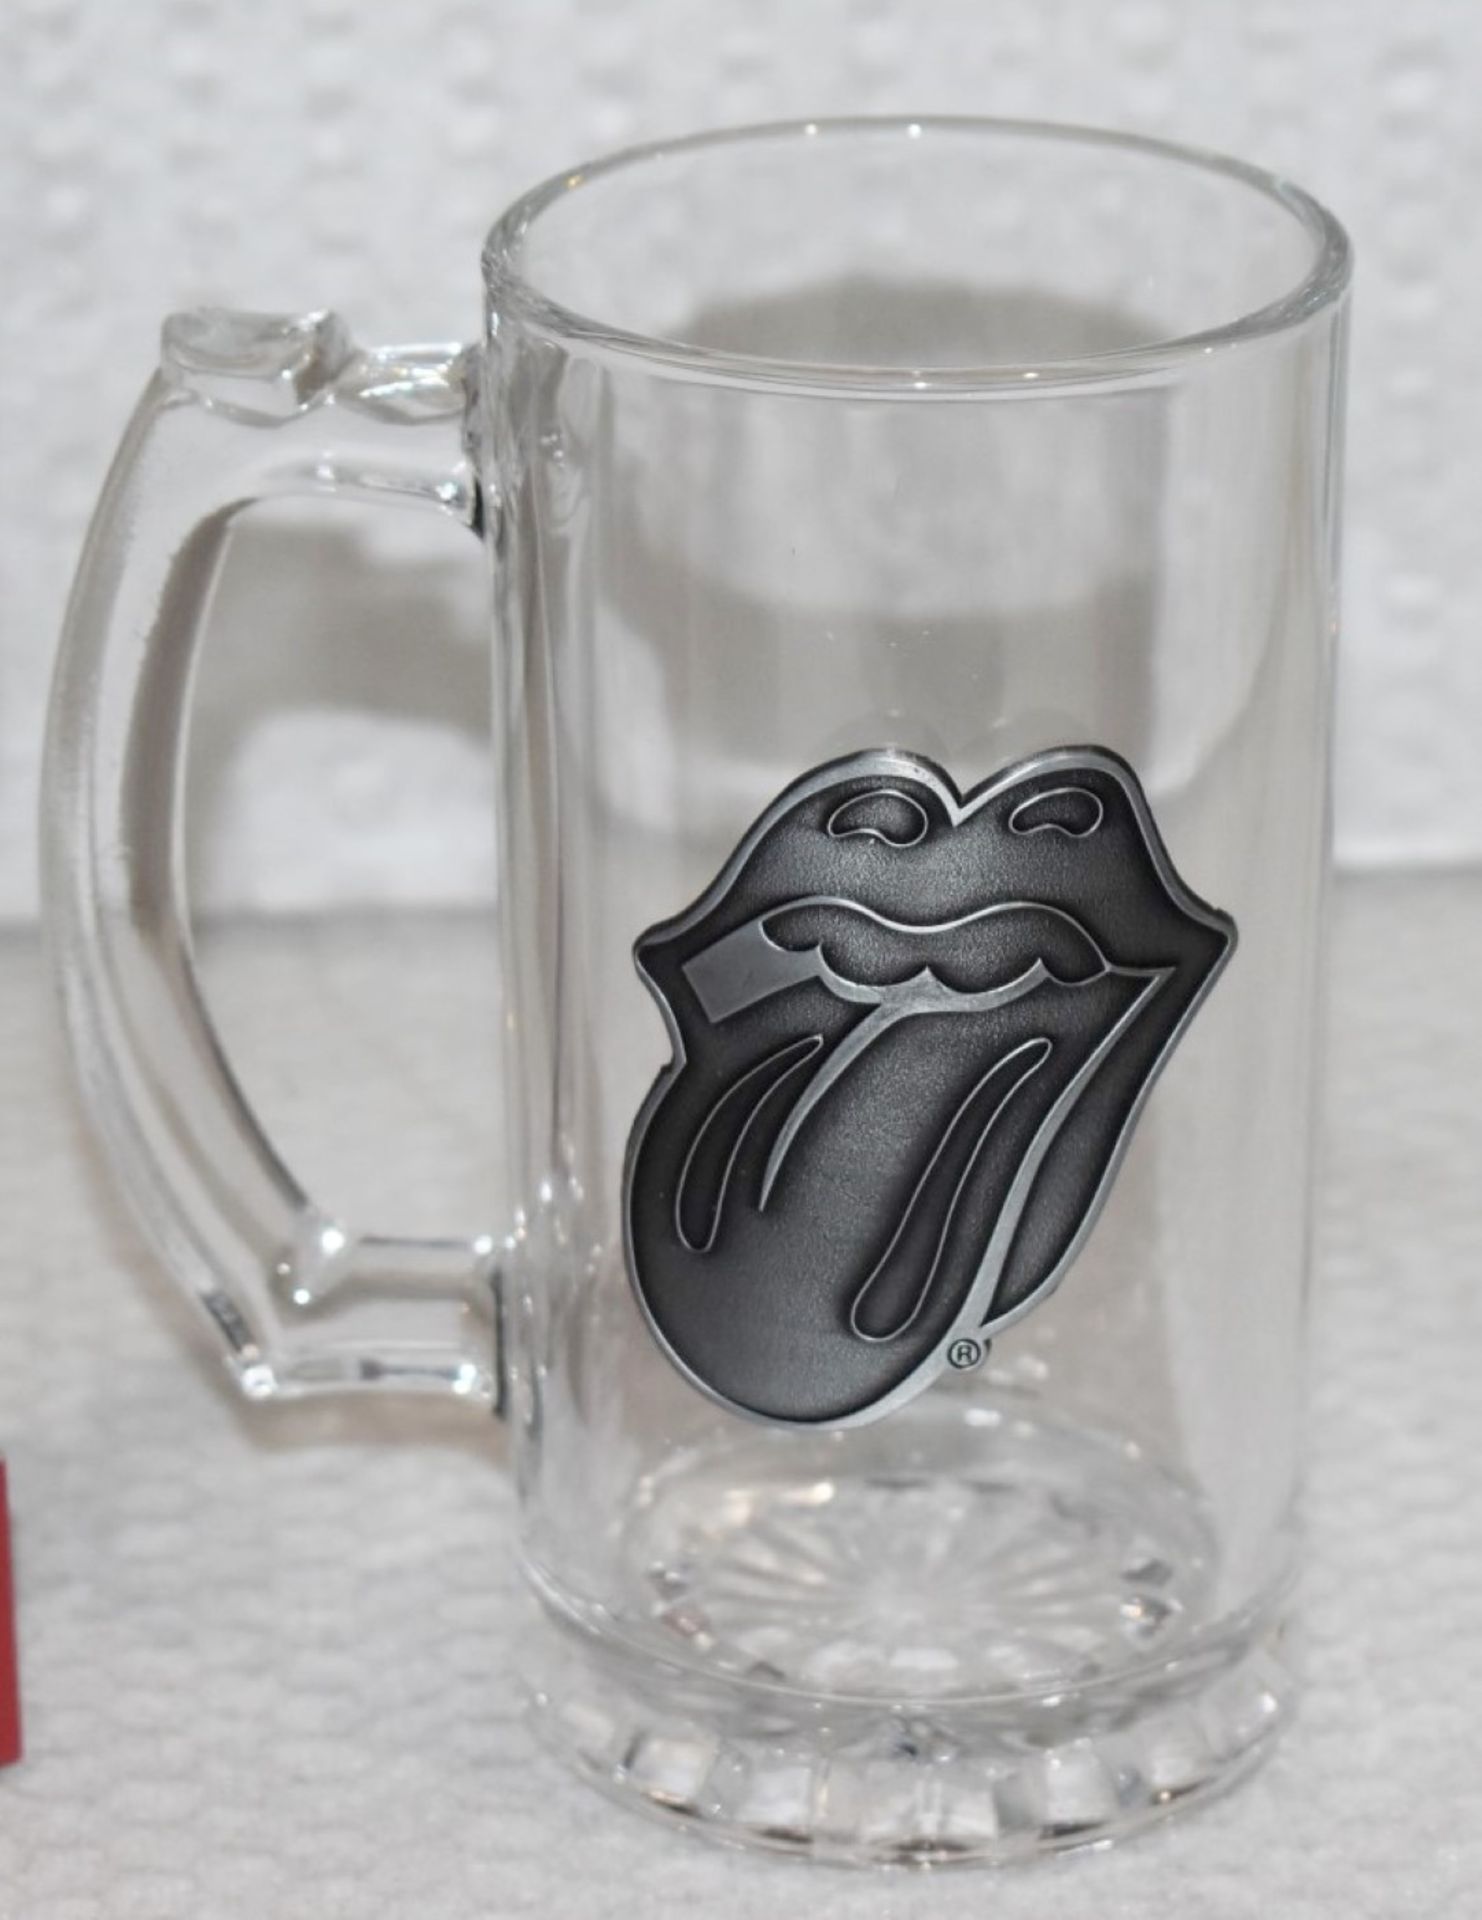 1 x Rolling Stones Half Pint Drinking Stein in Gift Box - Officially Licensed Merchandise By Bravado - Image 5 of 7